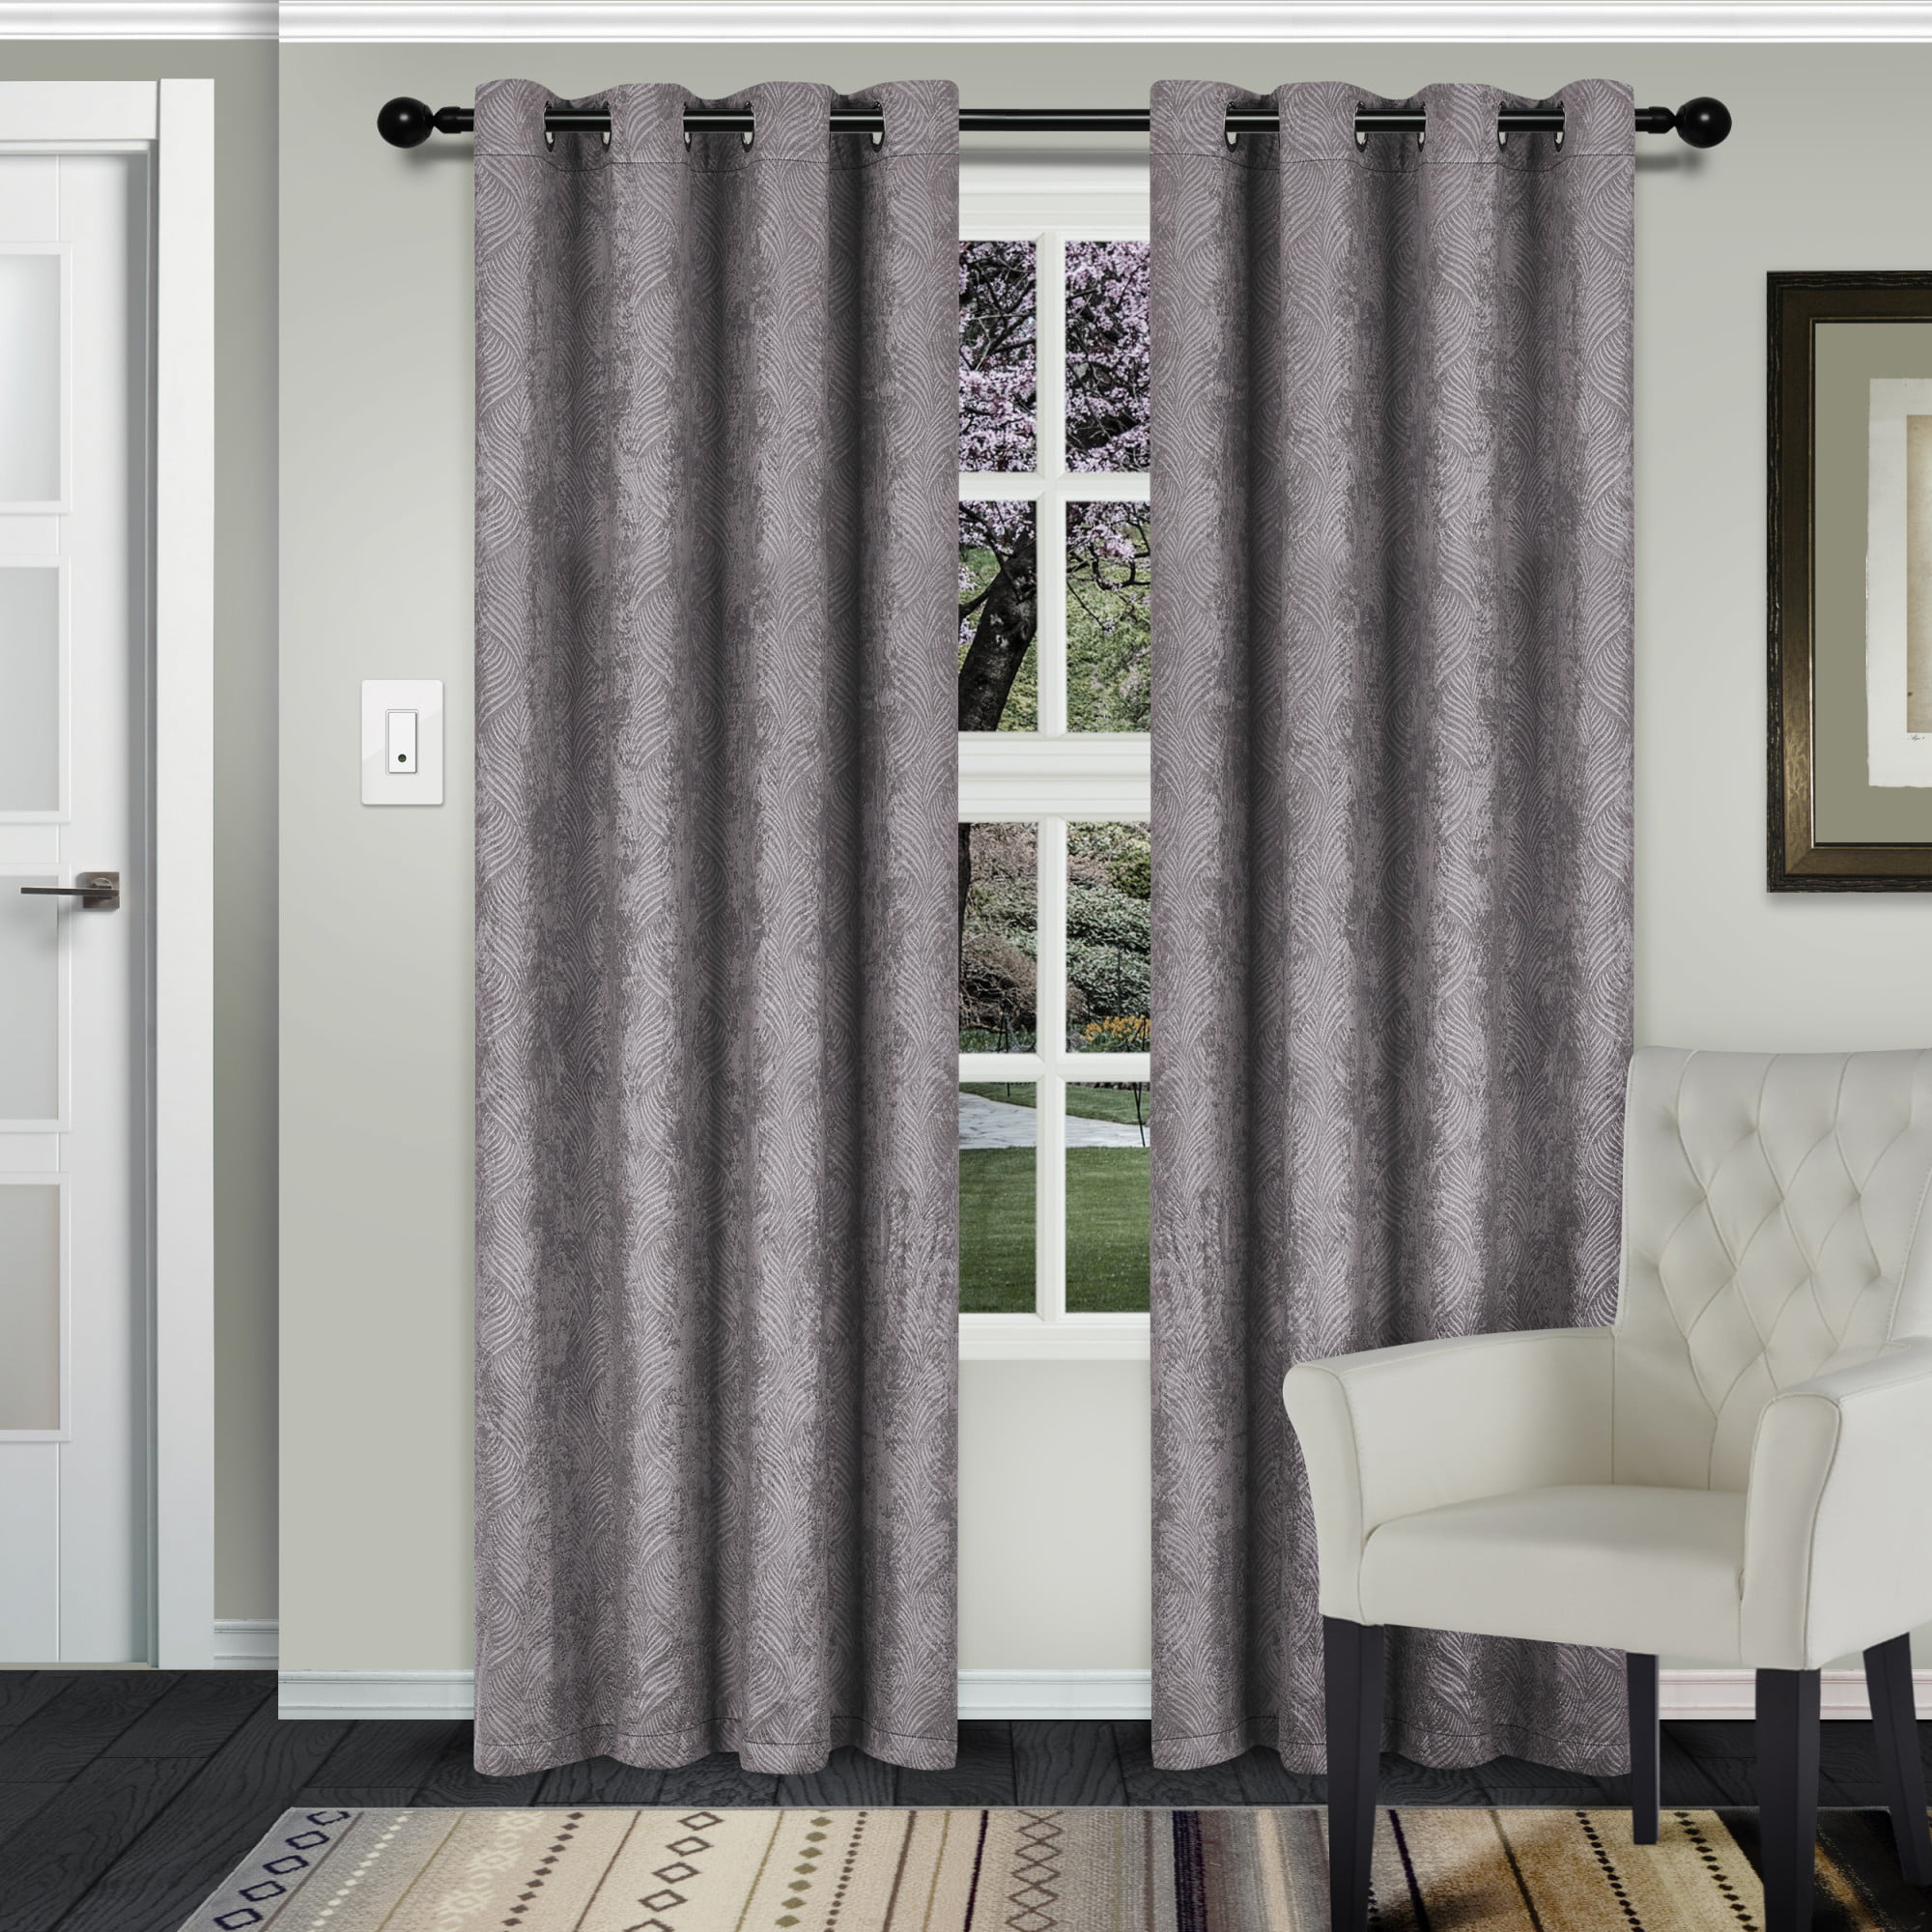 2PC THERMAL INSULATED BLACKOUT HALF WINDOW GROMMET CURTAIN PANELS UNLINED 54"lon 